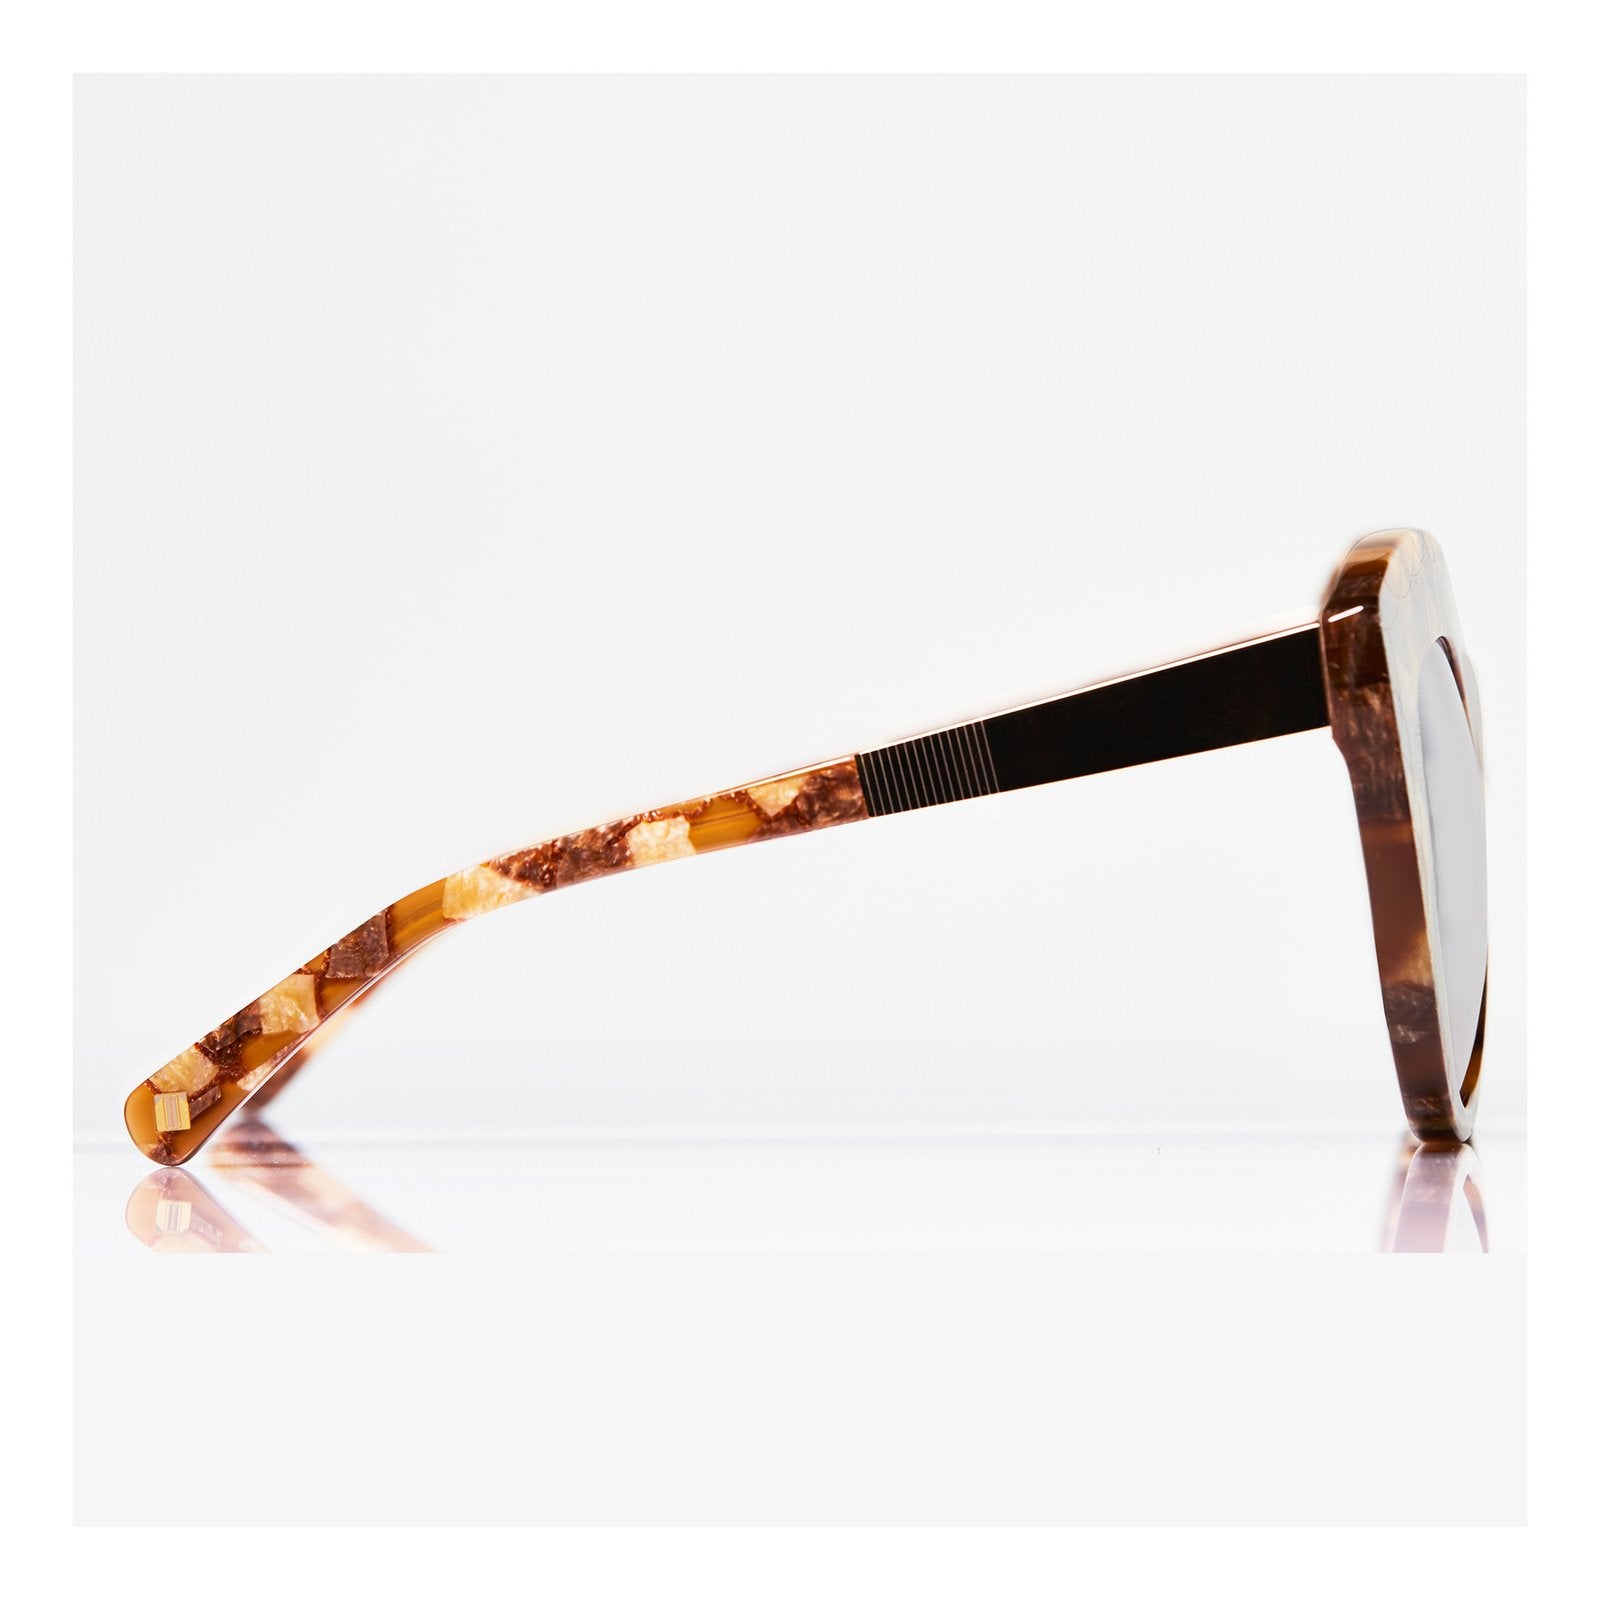 Brown sunglasses, Brown Multi Glasses, Oversized Cat Eye Sunglasses, Sunglasses Face Shape Guide, Eyewear Style Guide, Independent Eyewear, Woman-Owned Business, Geometric Eyewear, Blue Sunglasses, Mythology, Accessories, Accessible Luxury, Los Angeles, Art Deco Inspired, Luxury, Celebrity Style